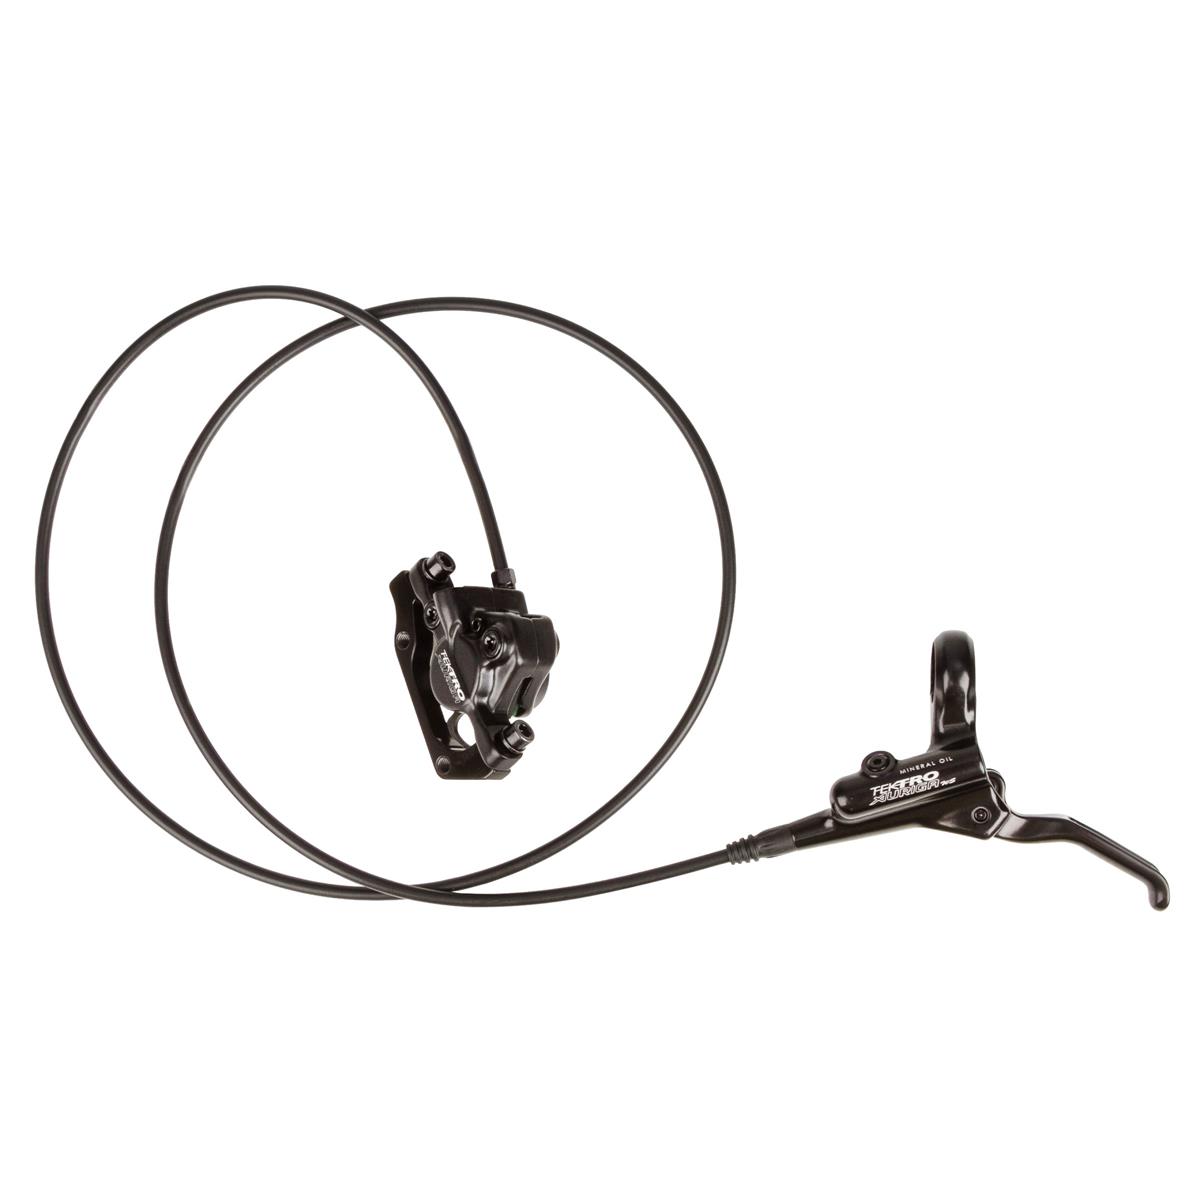 Kuberg Hydraulic Brake Kit Young Rider/Hero Rear, with caliper, lever and cables, black